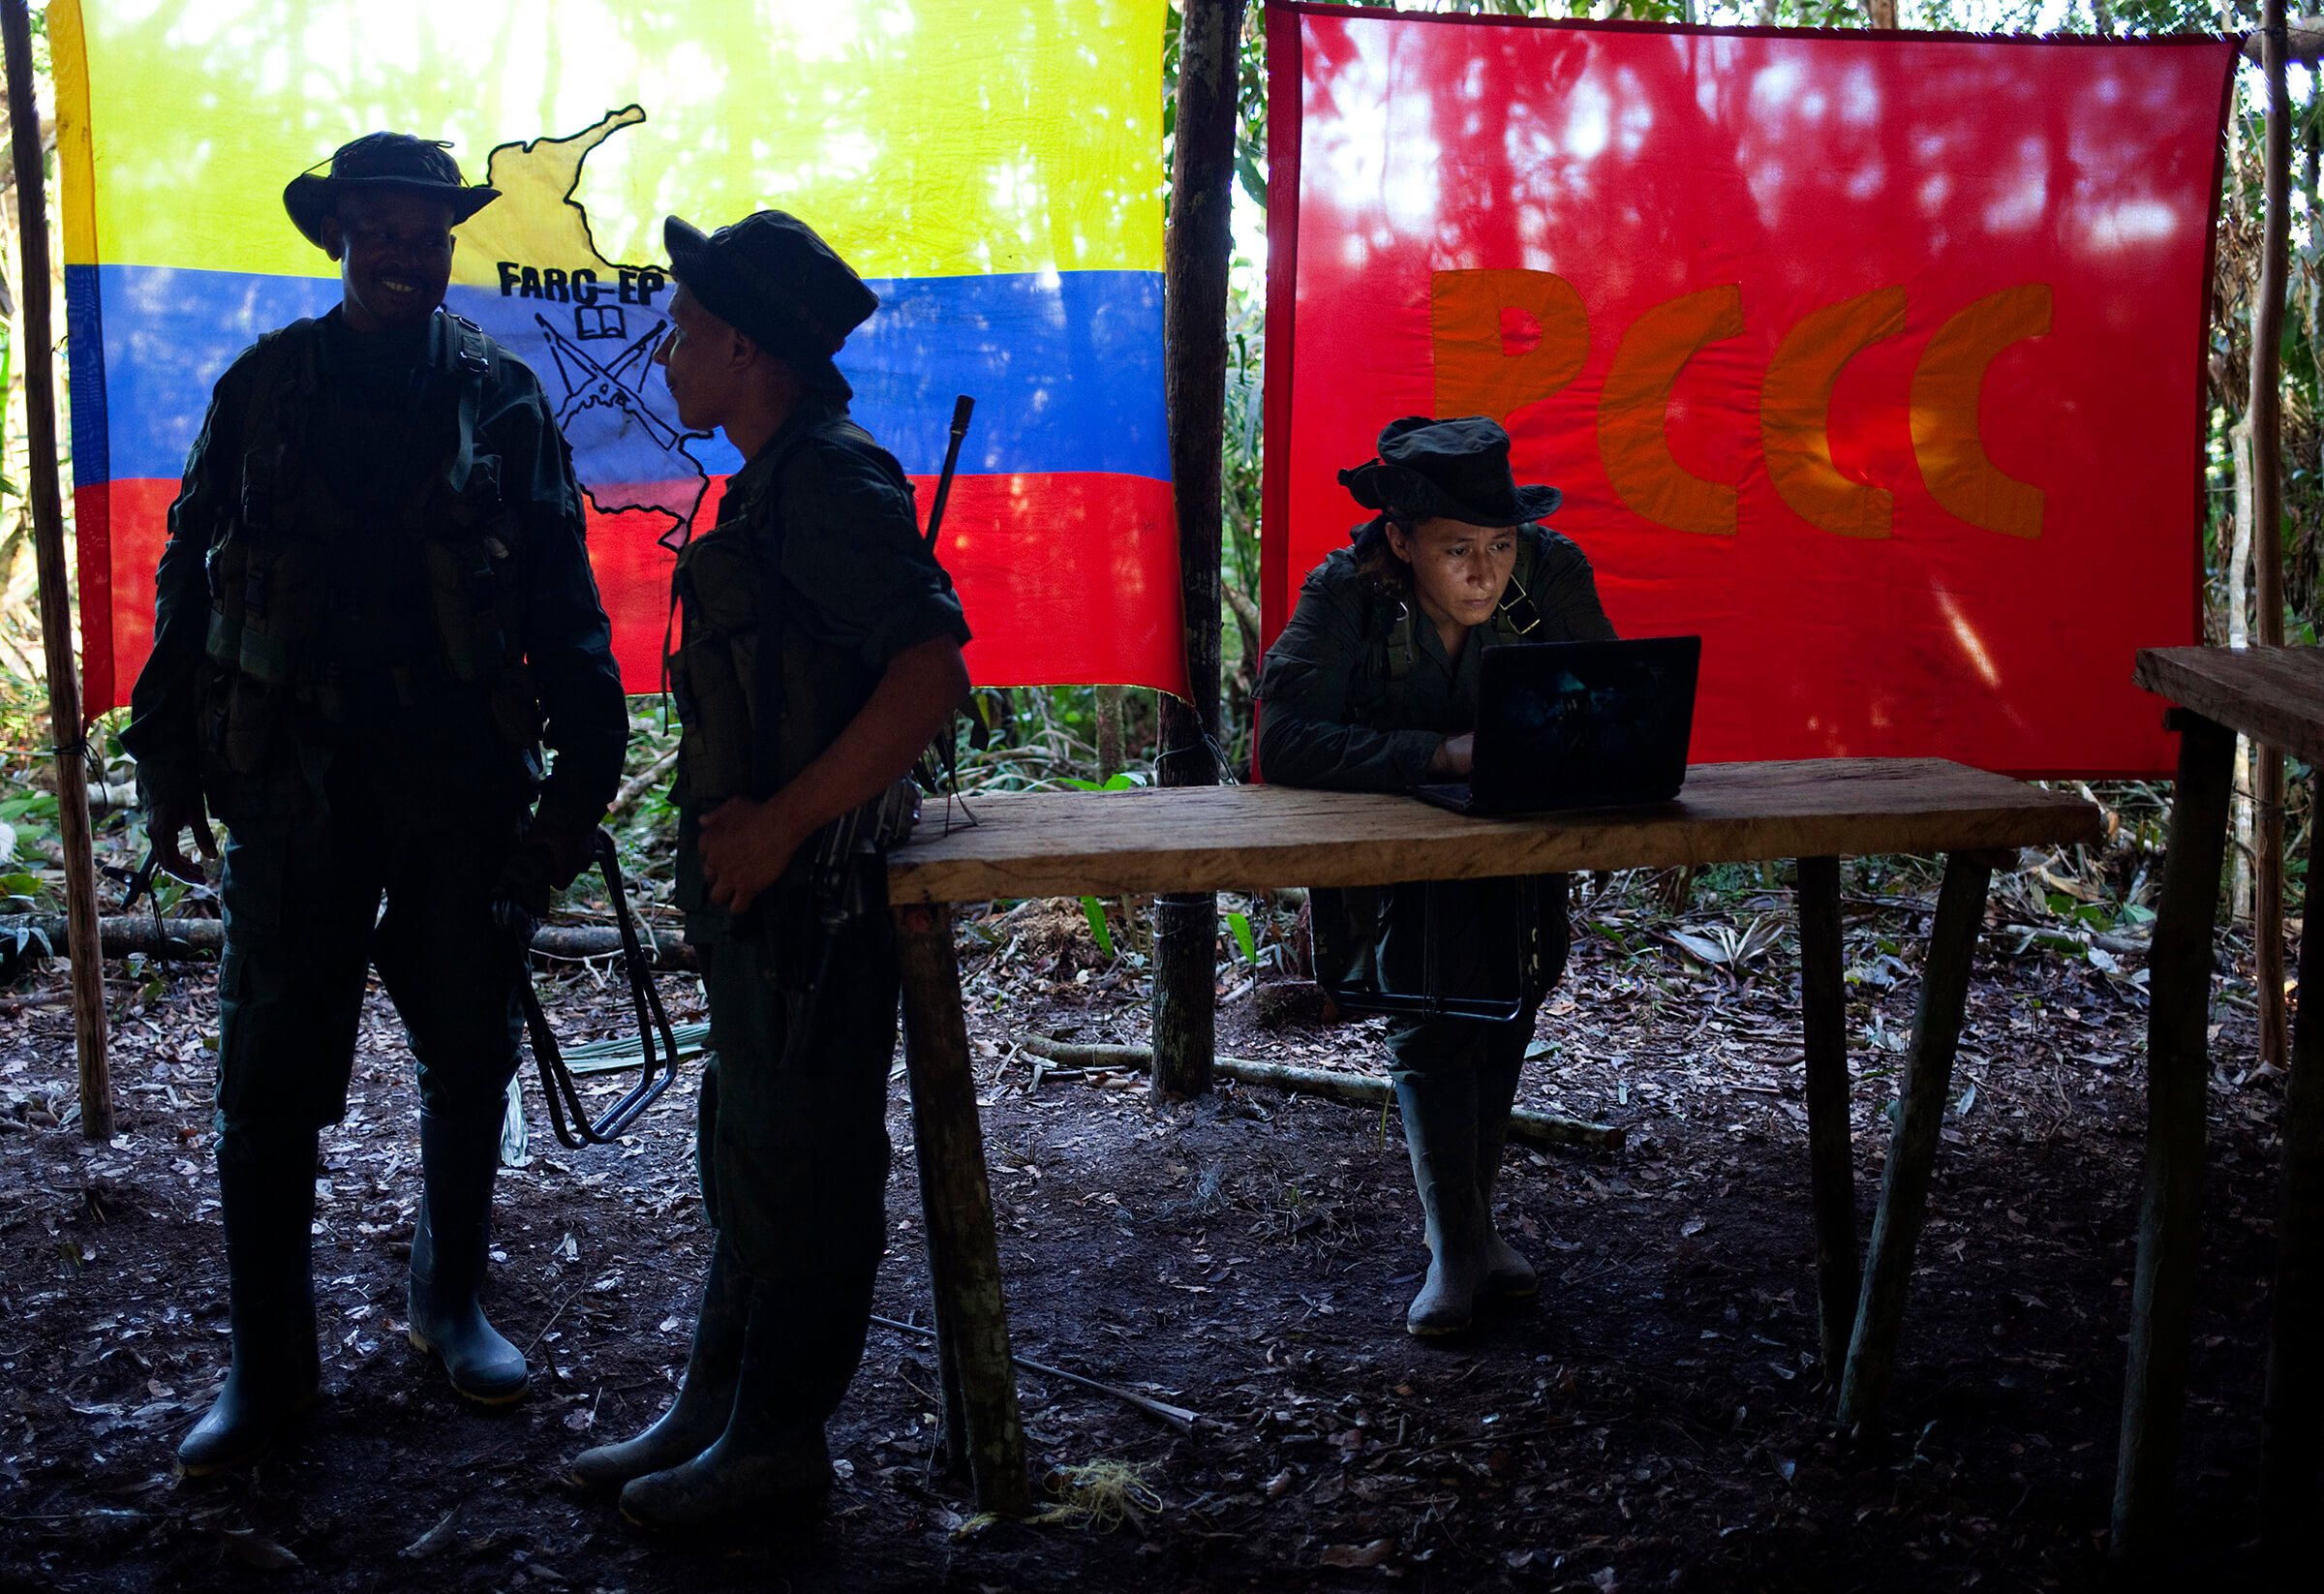 FARC rebels meet in a rebel camp in in Colombia in May 2016. Climate and environmental scientists are raising questions about how the peace process may impact forests that were previously undevelopable because of the rebel presence. (Reuters/Eliana Aponte) 